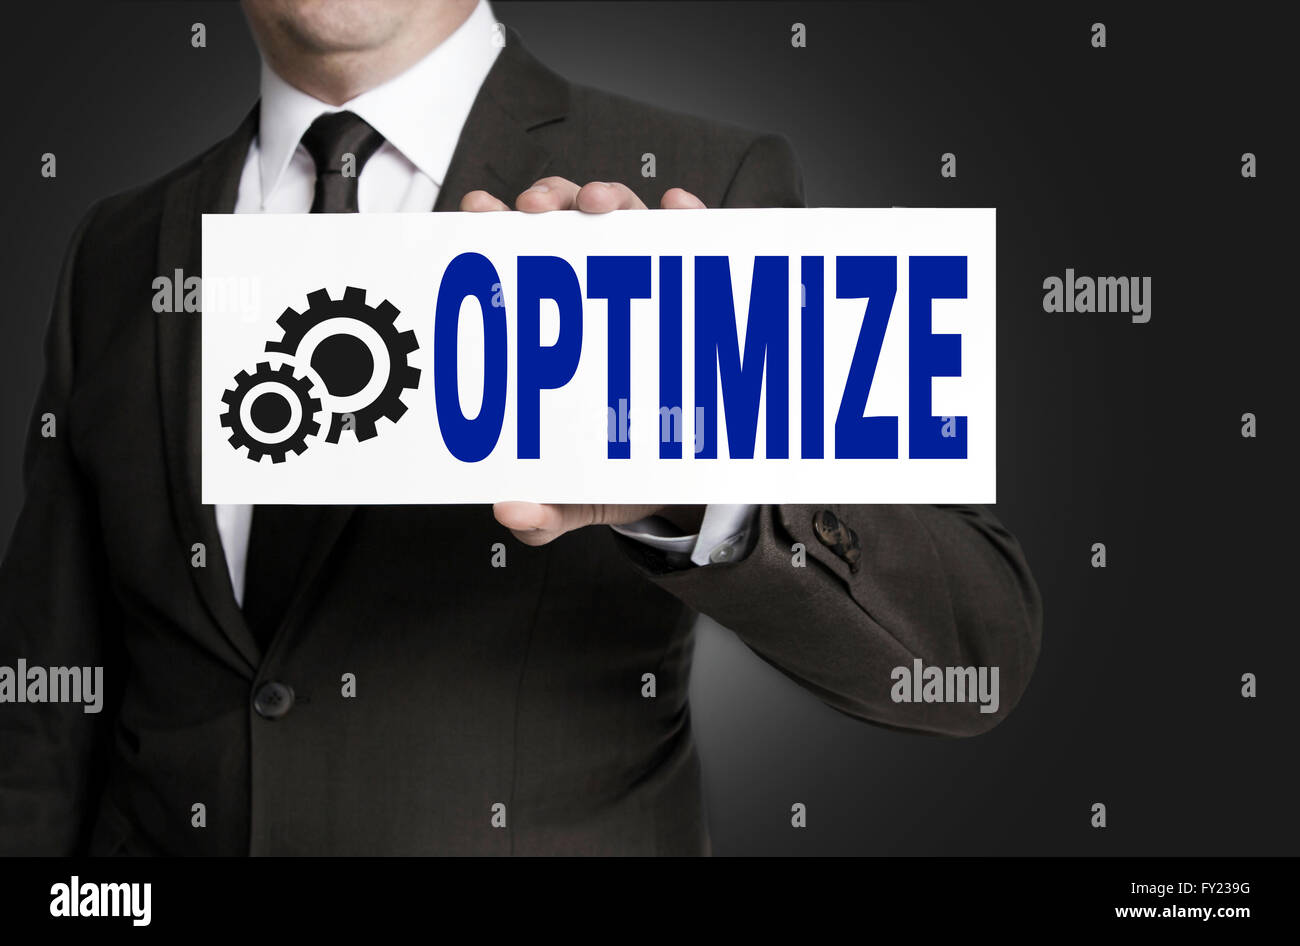 optimize sign is held by businessman background. Stock Photo